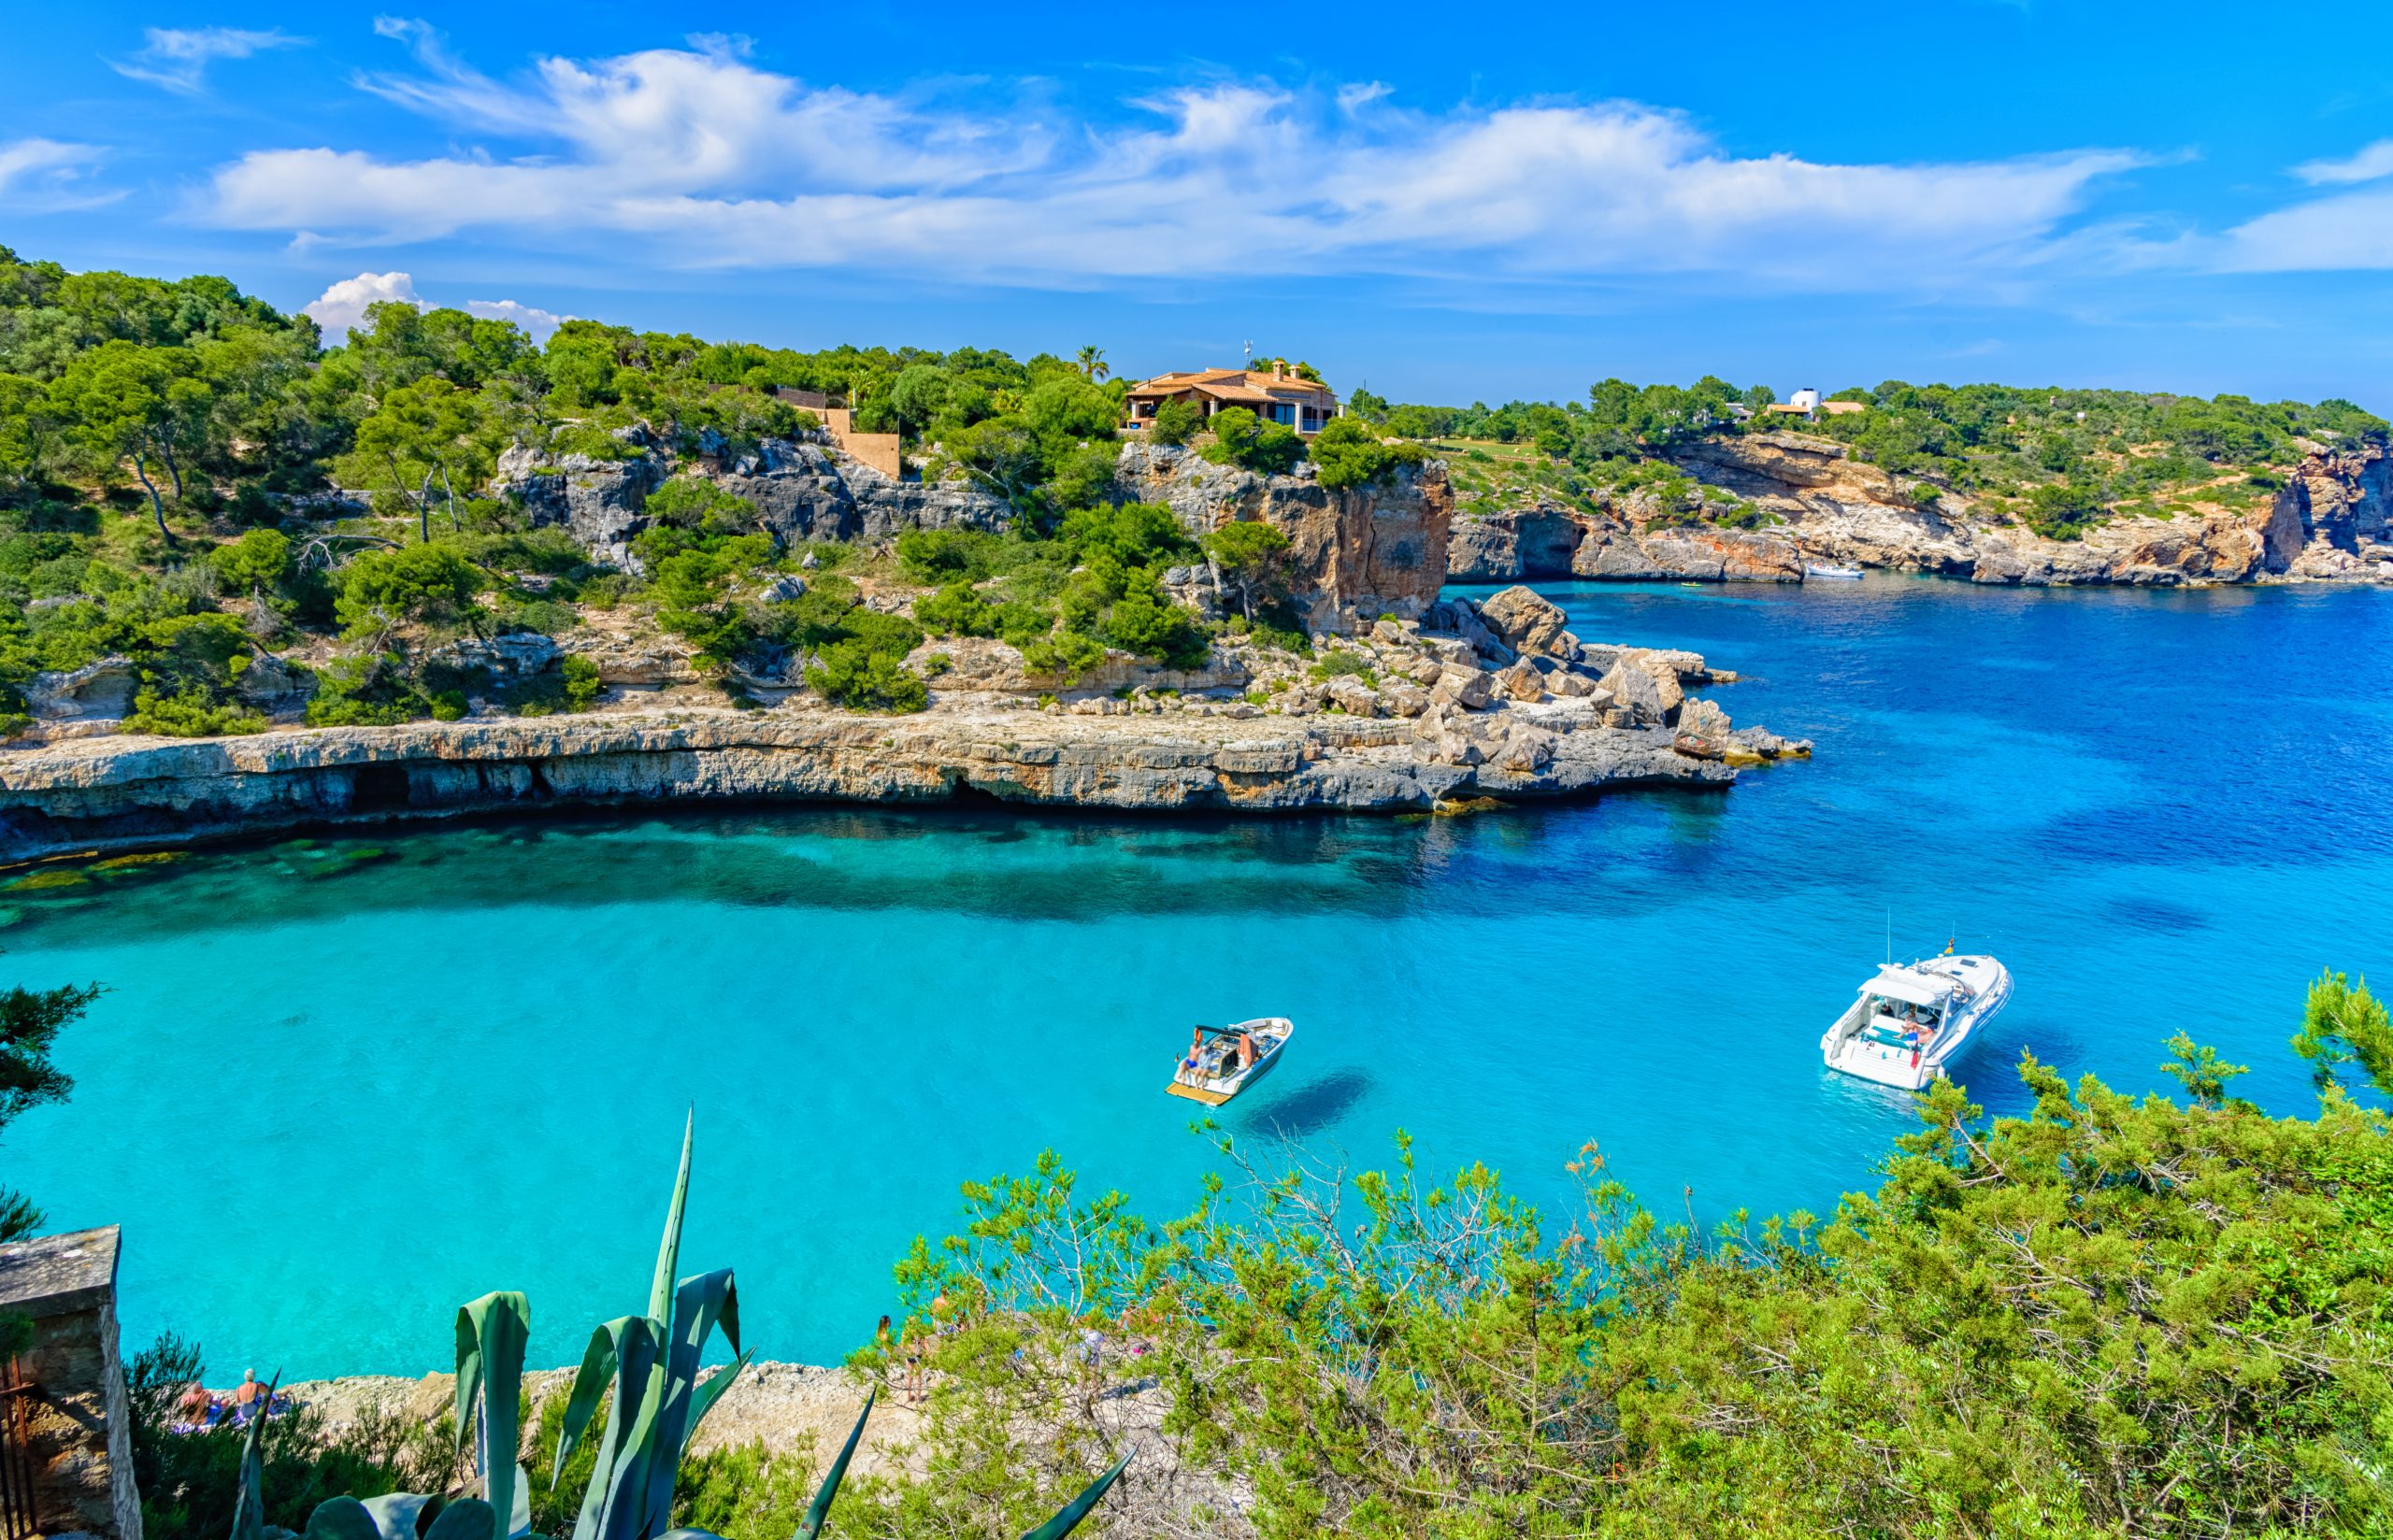 Summer holiday scene with boats on turquoise sea water of Mallorca in Cala Llombards beach, Palma de Mallorca in Spain